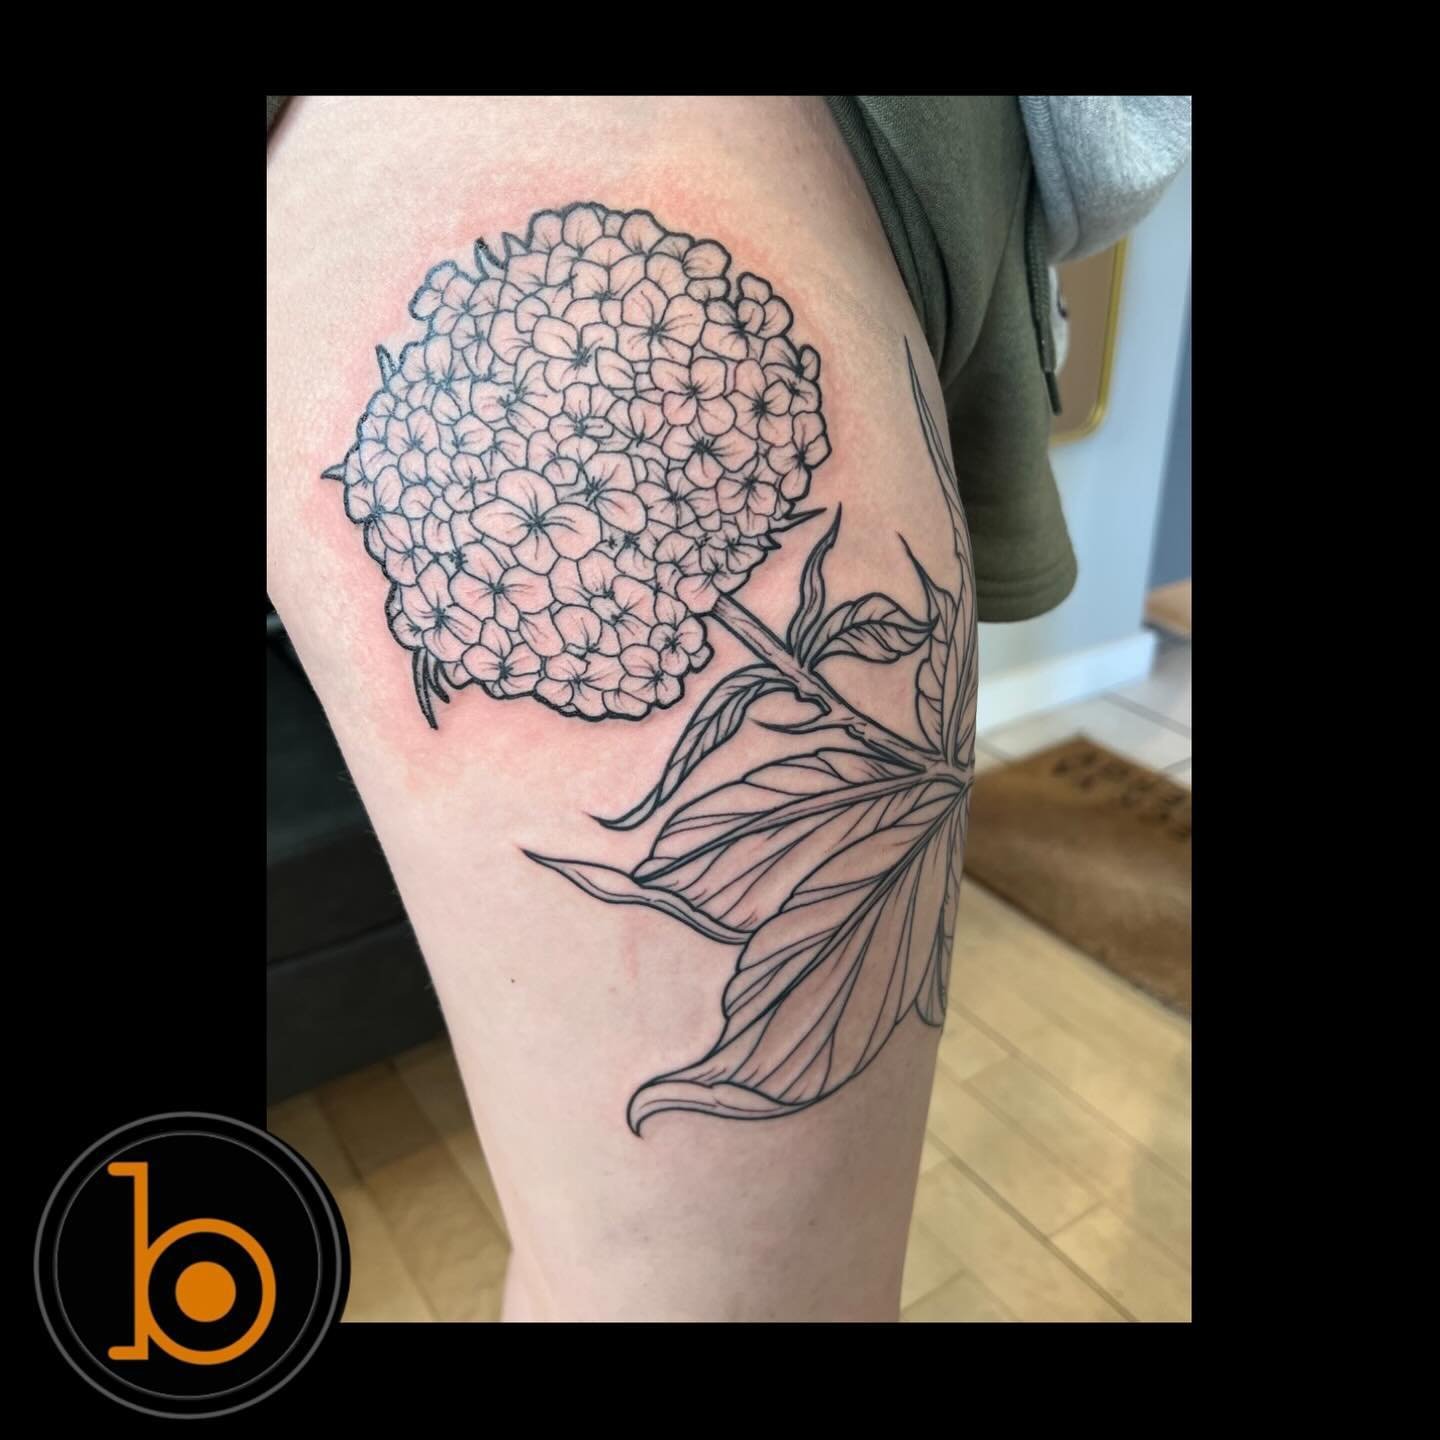 Gorgeous florals by resident artist @tbrewertattoo 🌸🫡
➖➖➖➖➖➖➖➖➖➖➖➖➖➖➖➖➖
Blueprint Gallery
138 Russell St
 Hadley MA 01035
📱(413)-387-0221 
WALK-INS WELCOME 
🕸️ www.blueprintgallery.com 🕸️
⬇️⬇️⬇️⬇️⬇️⬇️⬇️⬇️⬇️⬇️⬇️⬇️⬇️
Made using materials from:
🌈 